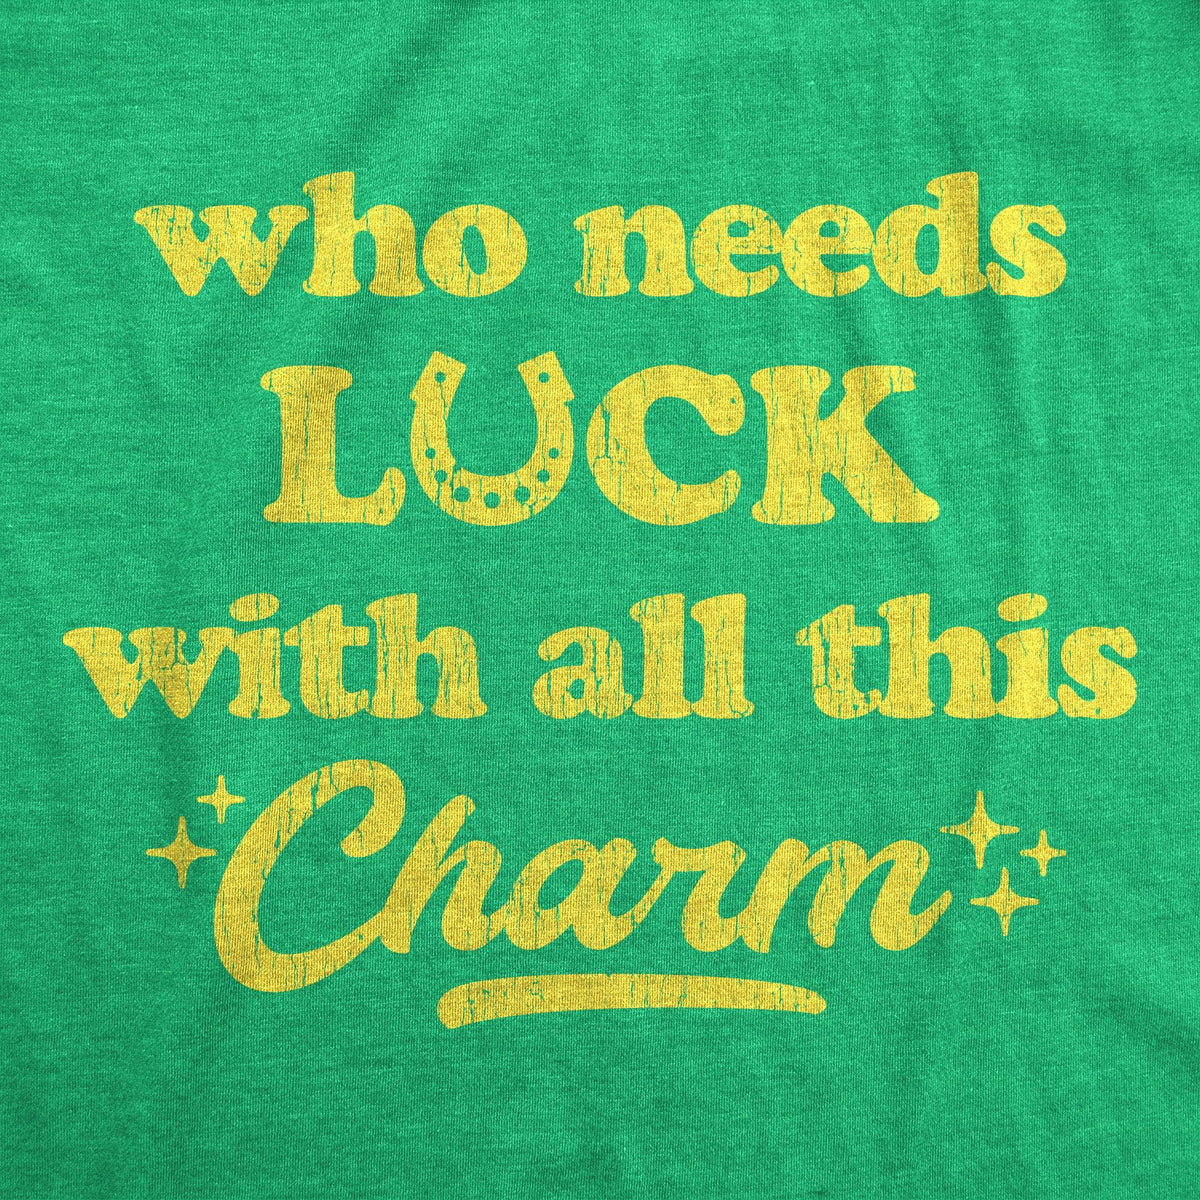 Who Needs Luck With All This Charm Men&#39;s Tshirt  -  Crazy Dog T-Shirts